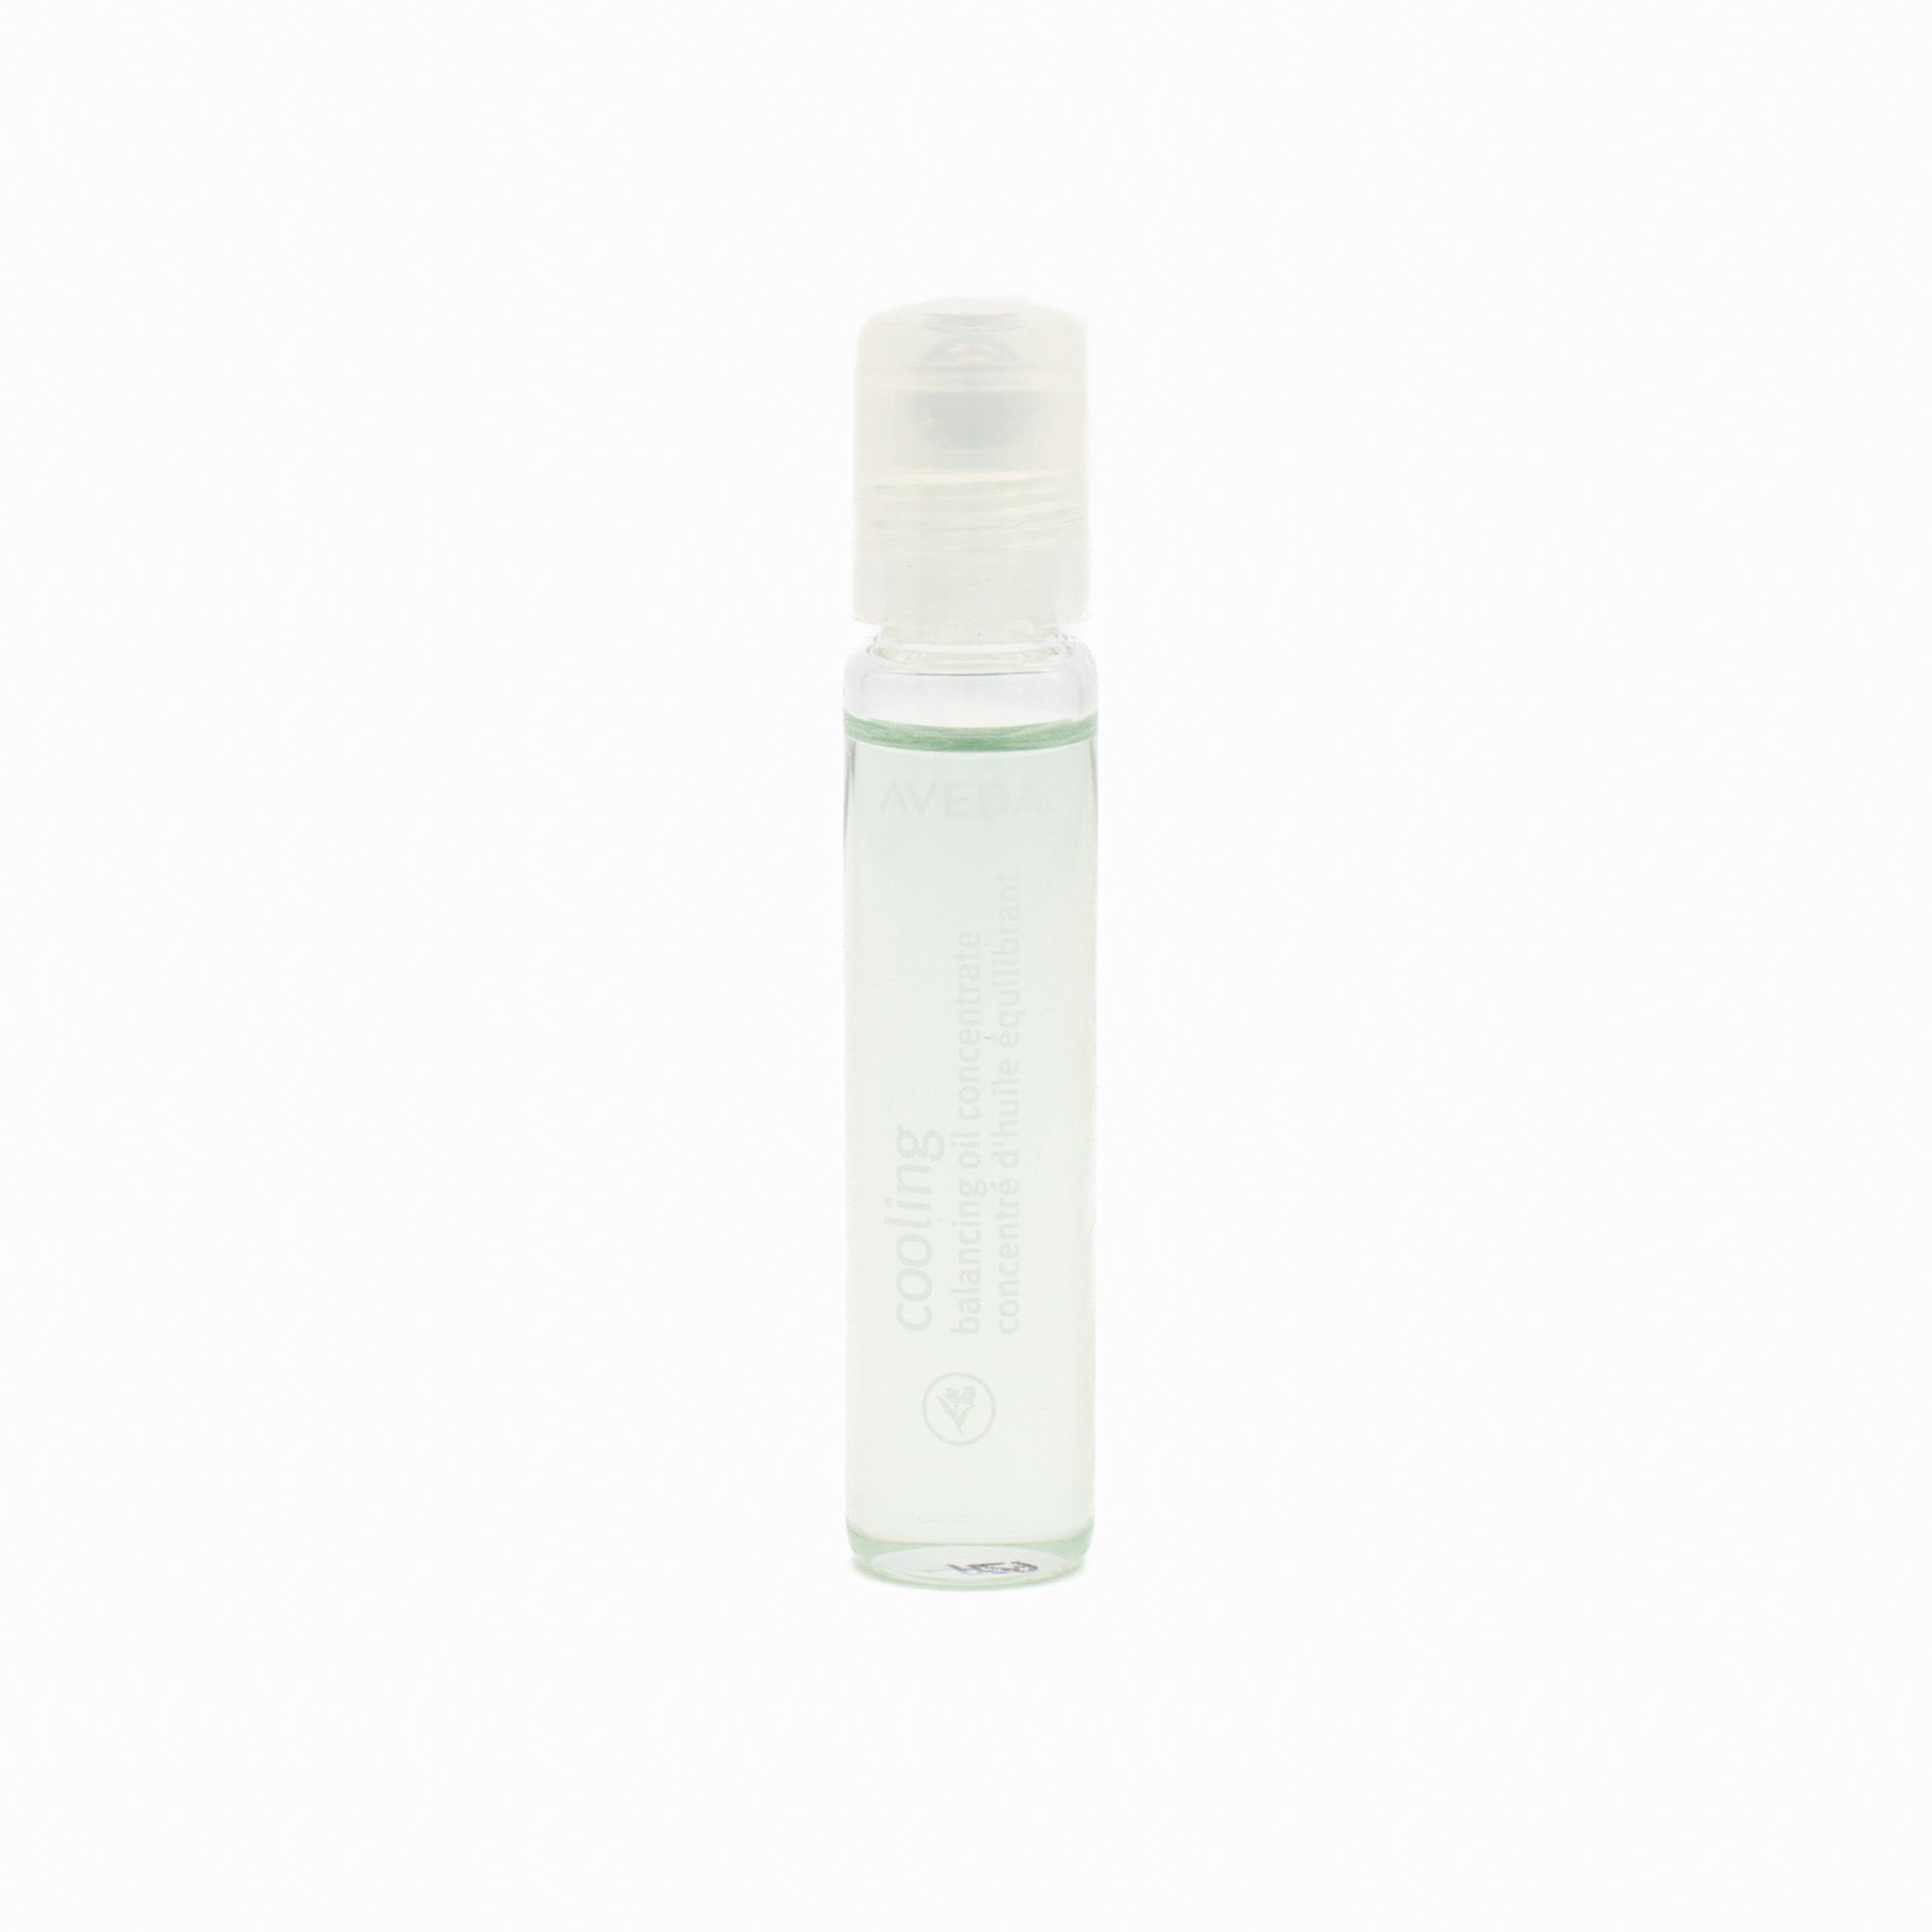 Aveda Cooling Balancing Oil Concentrate Rollerball 7ml - Imperfect Box - This is Beauty UK